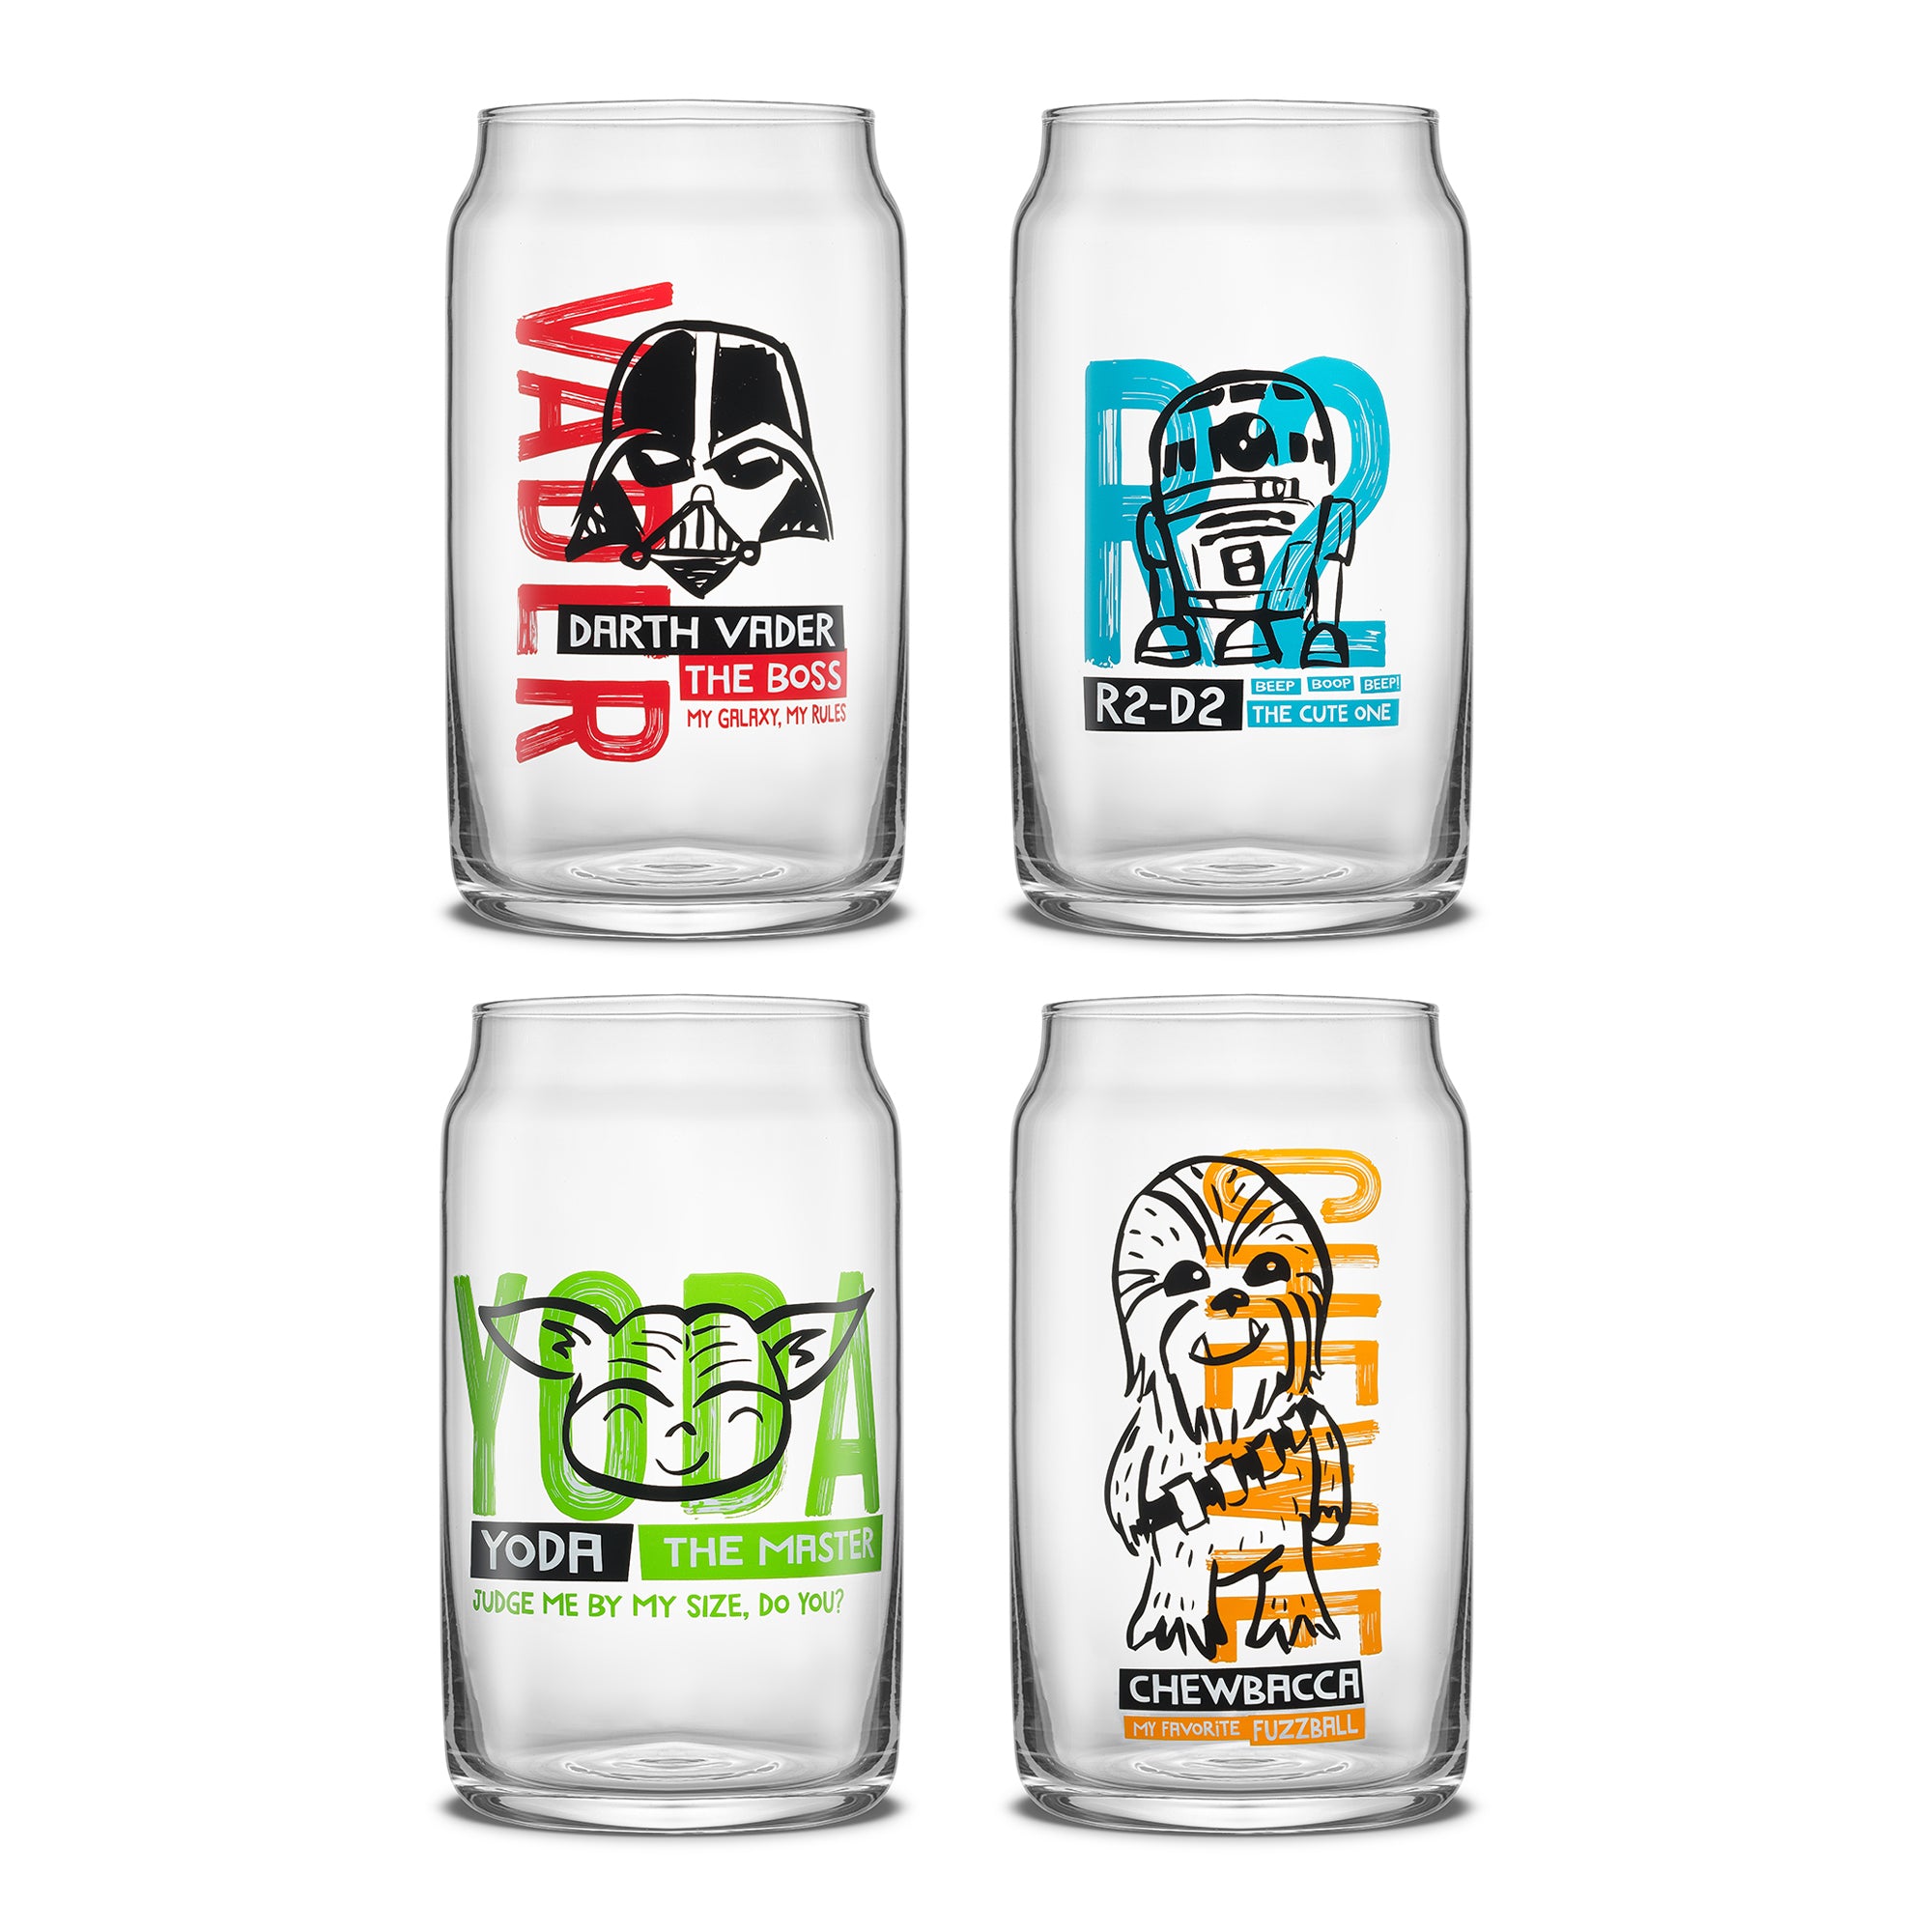 JoyJolt's Star Wars 'Now Playing' glass tumbler set, a must-have addition to any fan's drinkware collection. Featuring four iconic characters from the beloved saga - Darth Vader, R2-D2, Yoda, and Chewbacca.